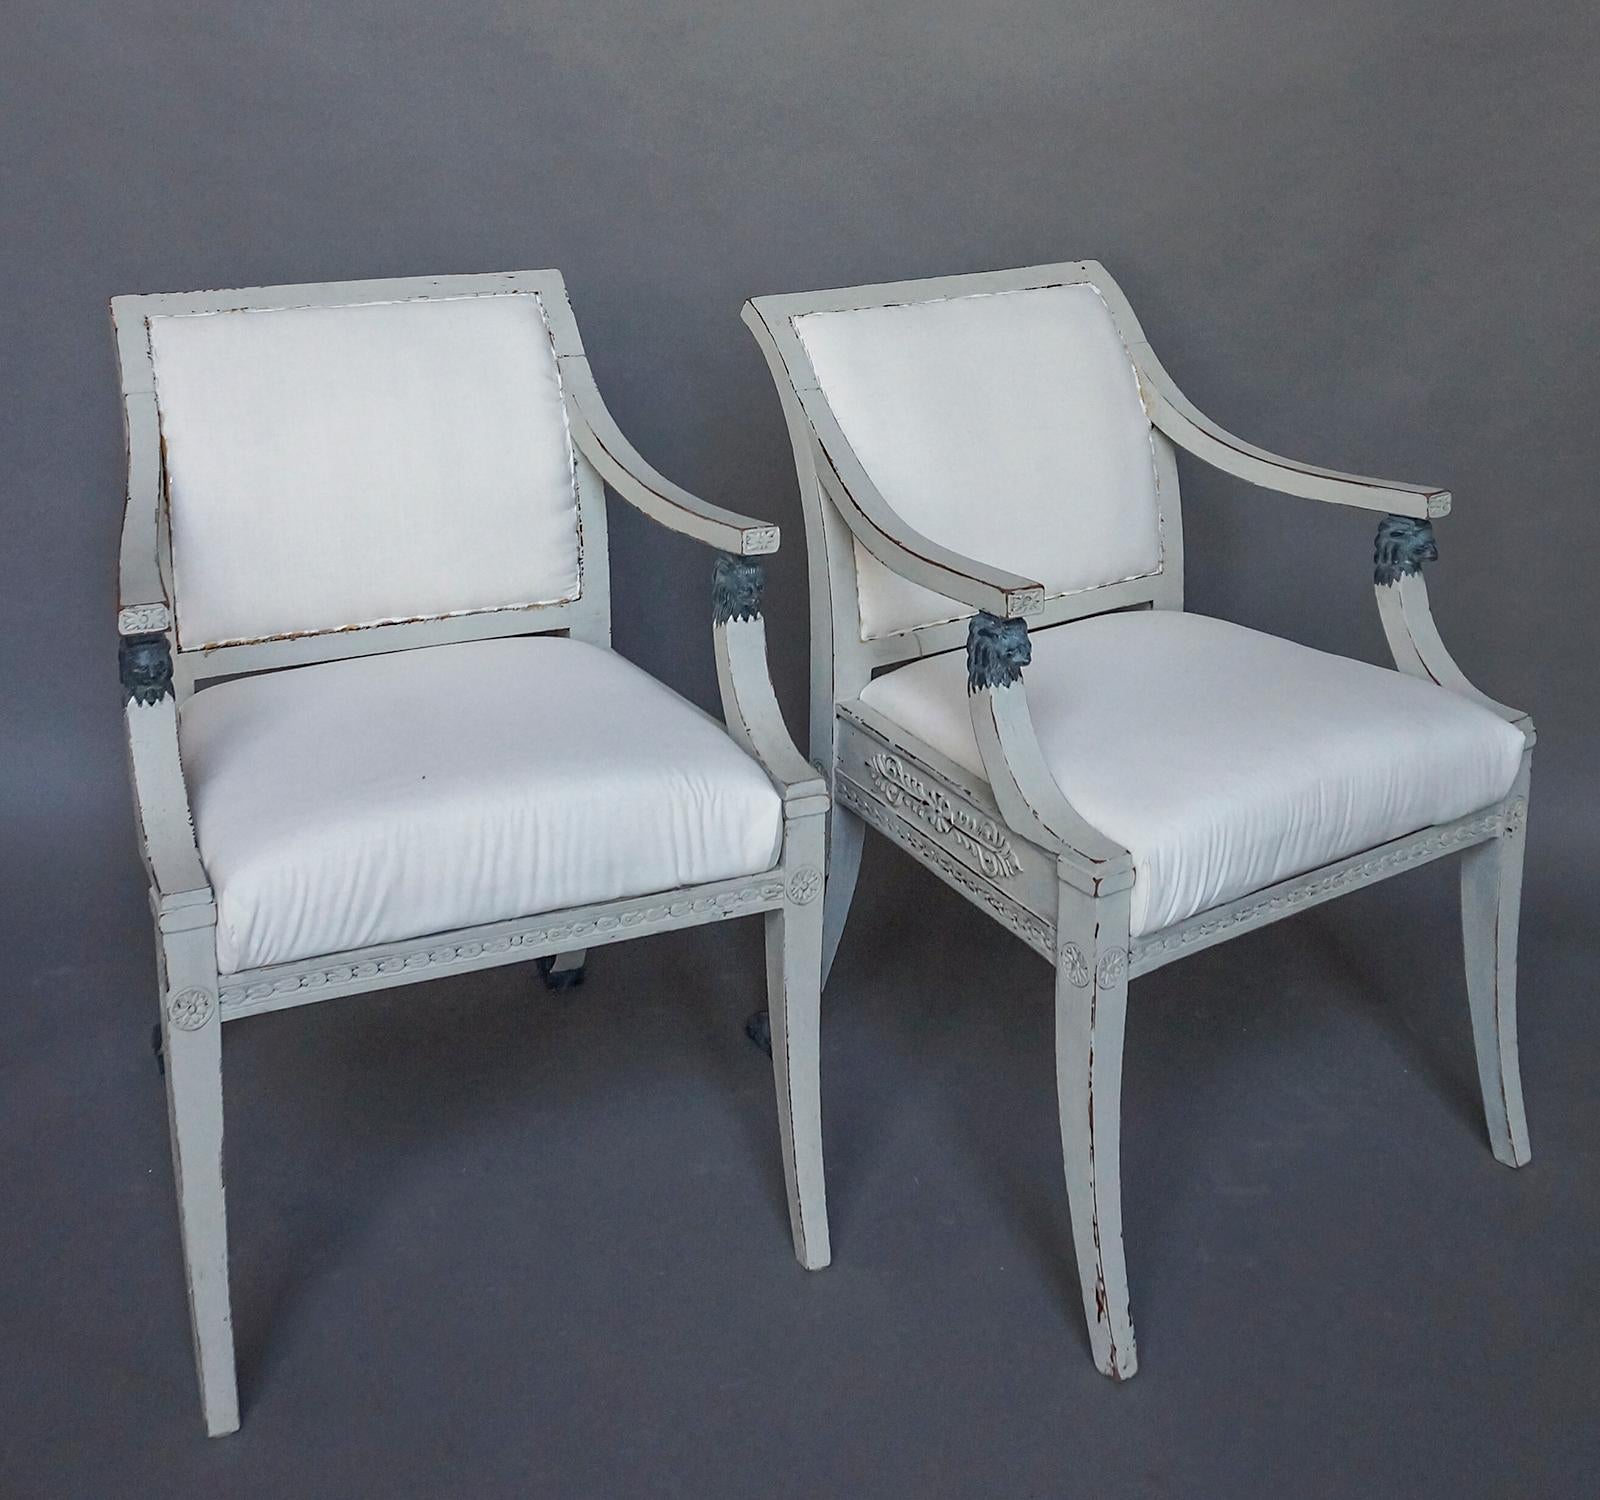 Pair of Swedish armchairs in the neoclassical style, circa 1900. The sides and backs of the frame have acanthus leaf carvings, and the arms are supported by lions’ heads. The rear saber legs terminate in paw feet. Upholstered backs and slip seats.